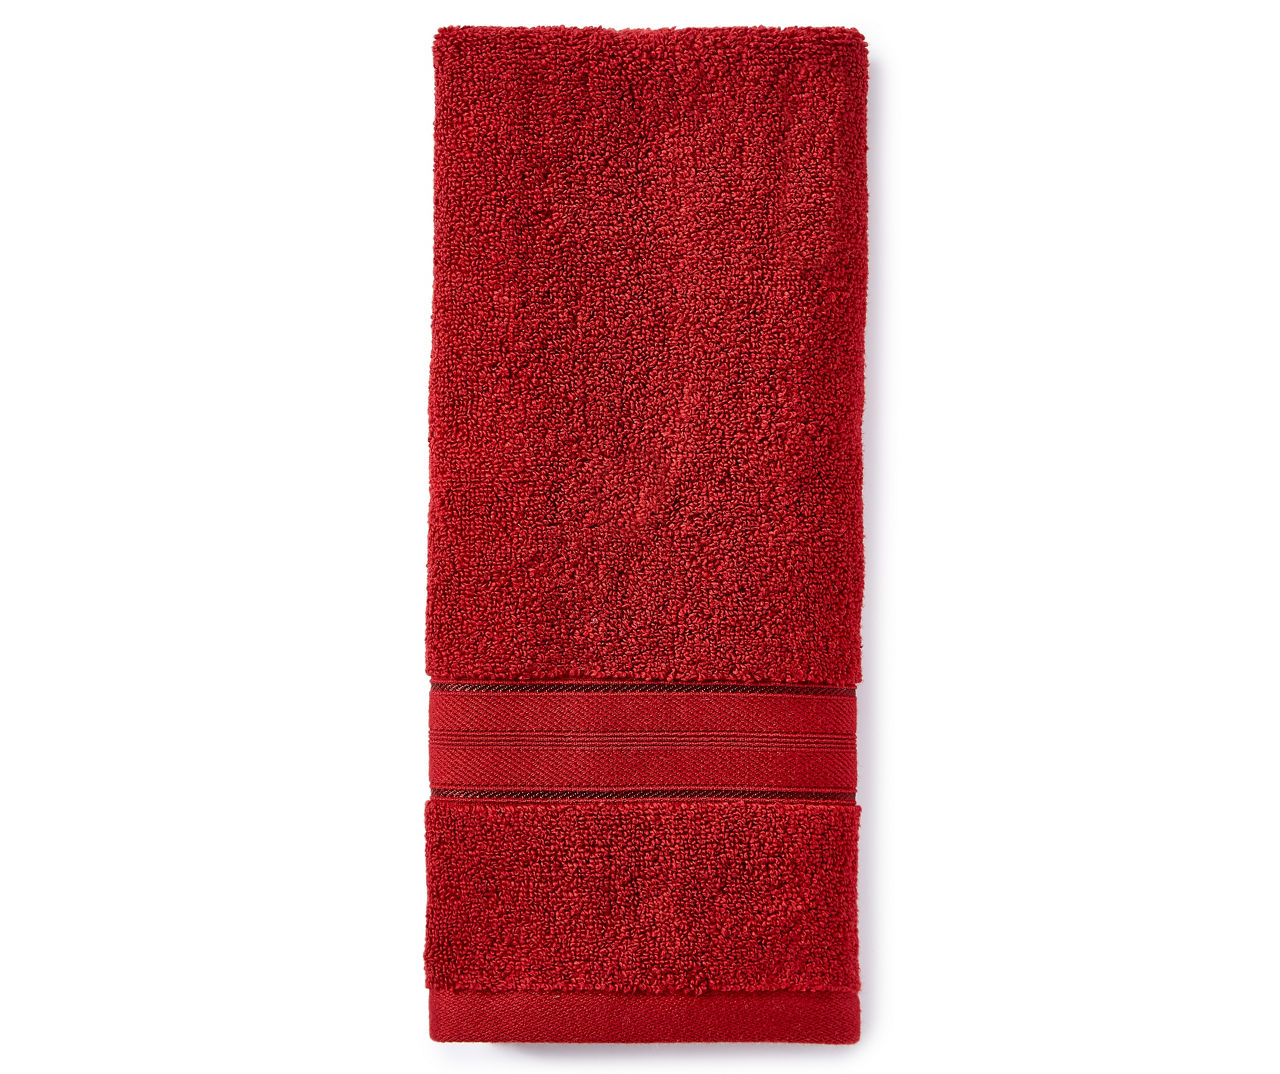 LC HAND TOWEL TOMATO RED